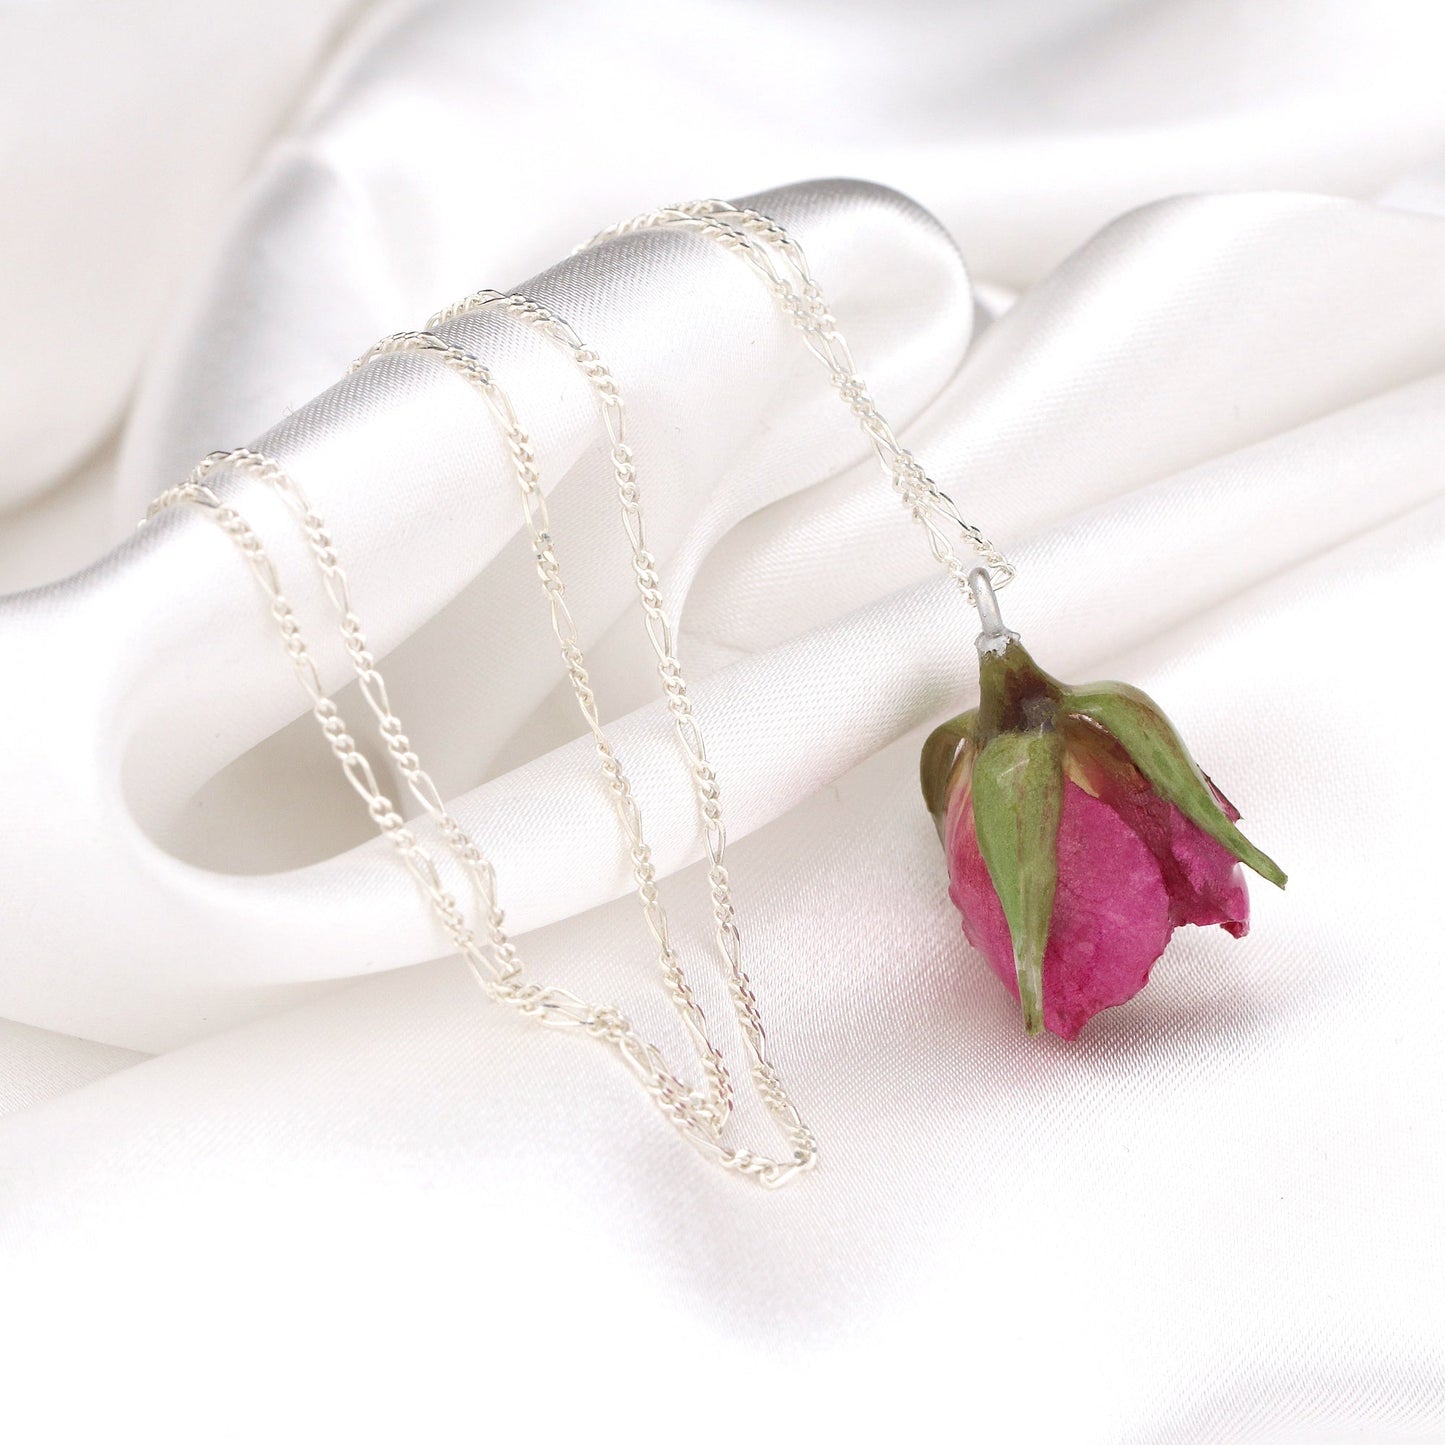 Real Rose Pendant with 925 Sterling Silver Chain - Botanical Necklace - K925-117